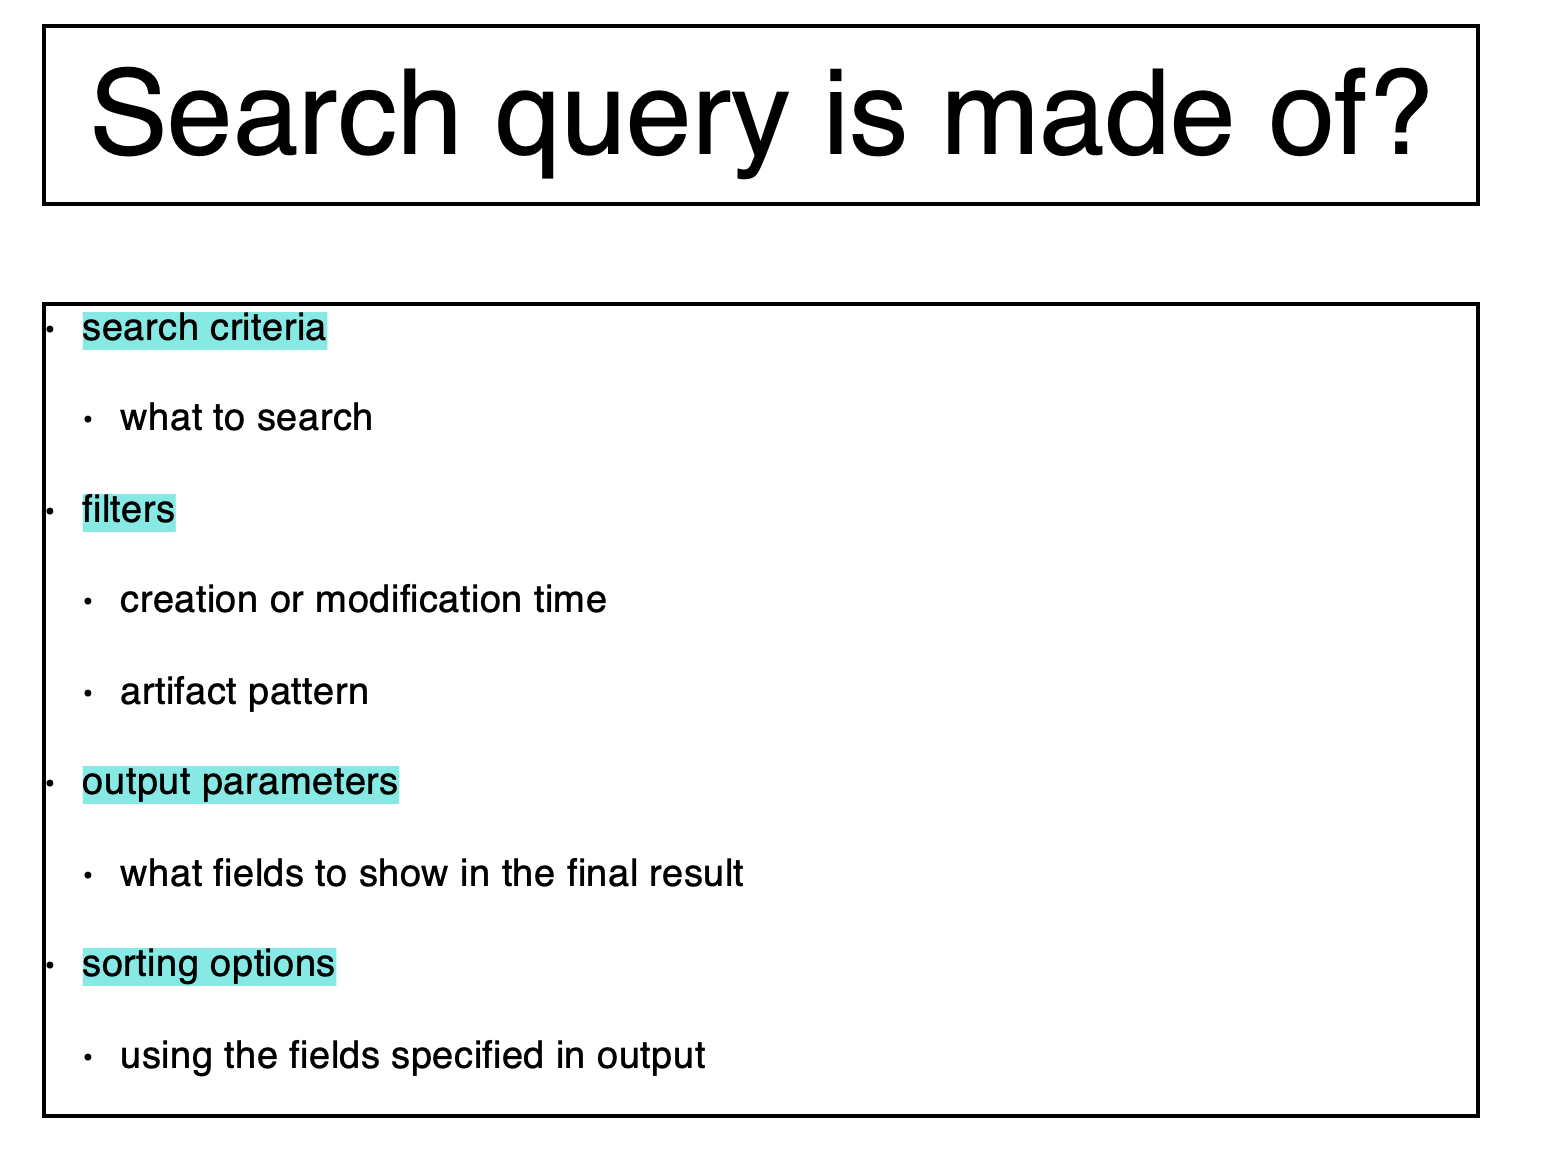 Search query components